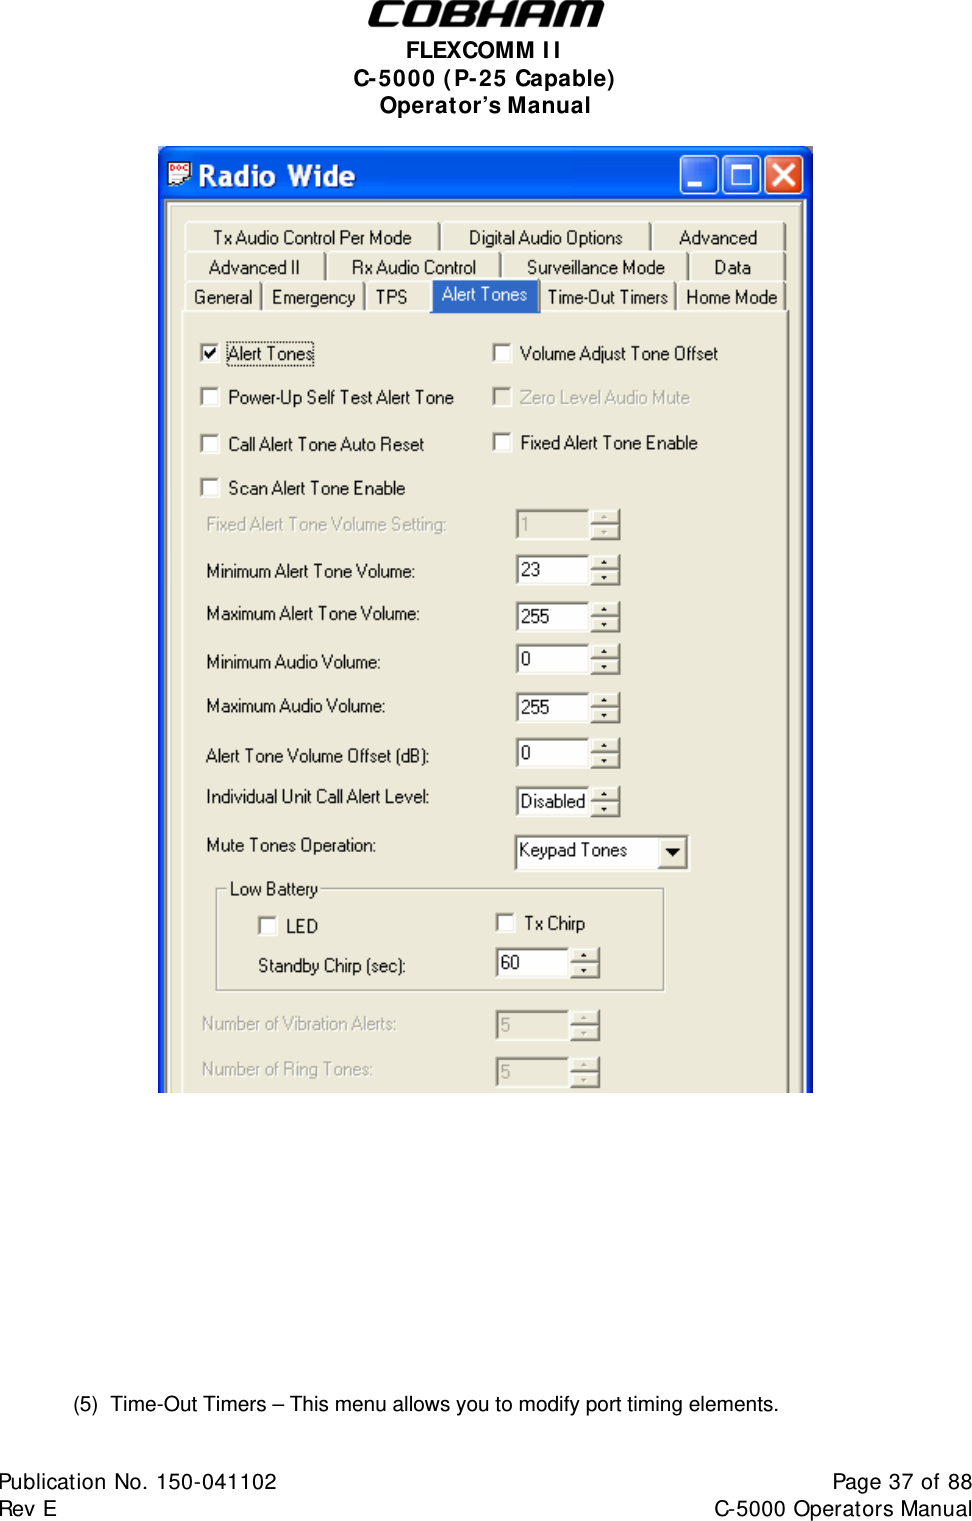  FLEXCOMM I I  C-5000 ( P-25 Capable)  Operator’s Manual                  (5)  Time-Out Timers – This menu allows you to modify port timing elements.   Publication No. 150-041102  Page 37 of 88  Rev E  C-5000 Operators Manual    